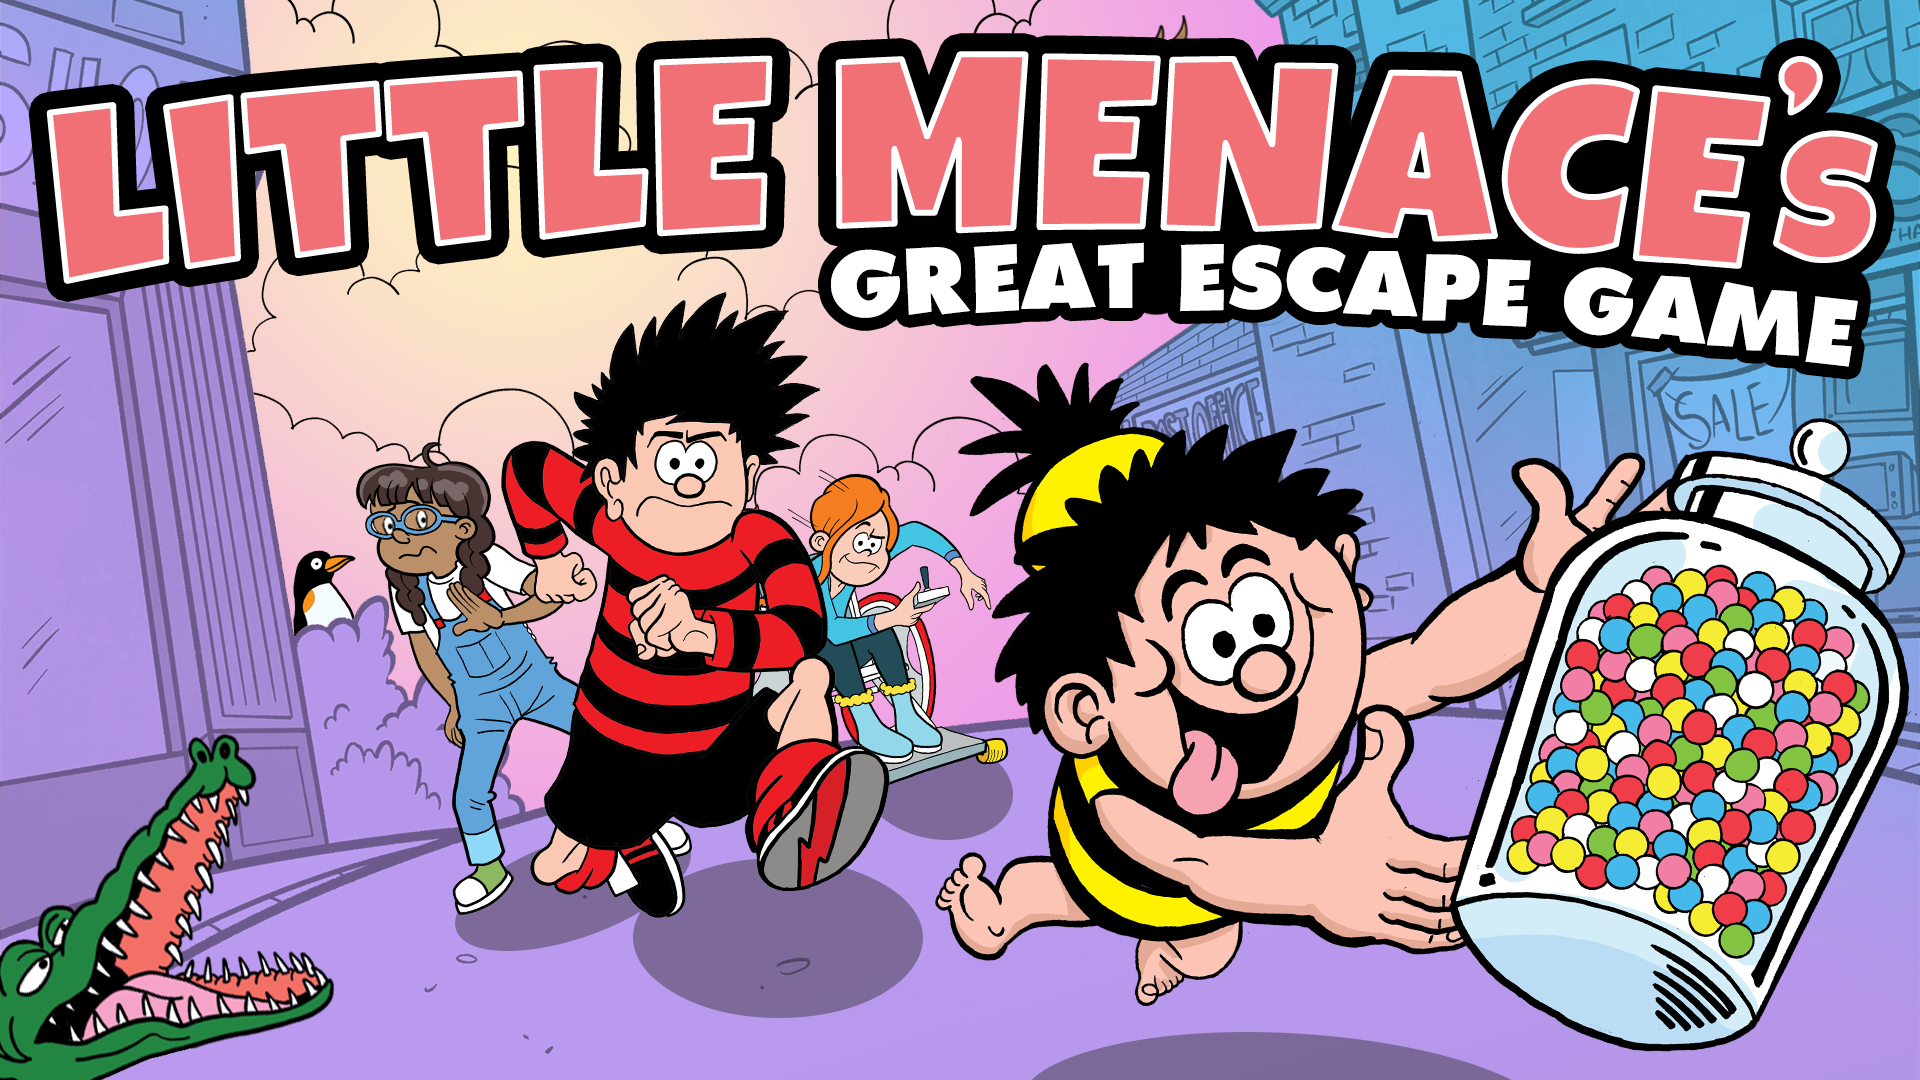 Little Menace's Great Escape Game - Baby Bea is chasing the sweets